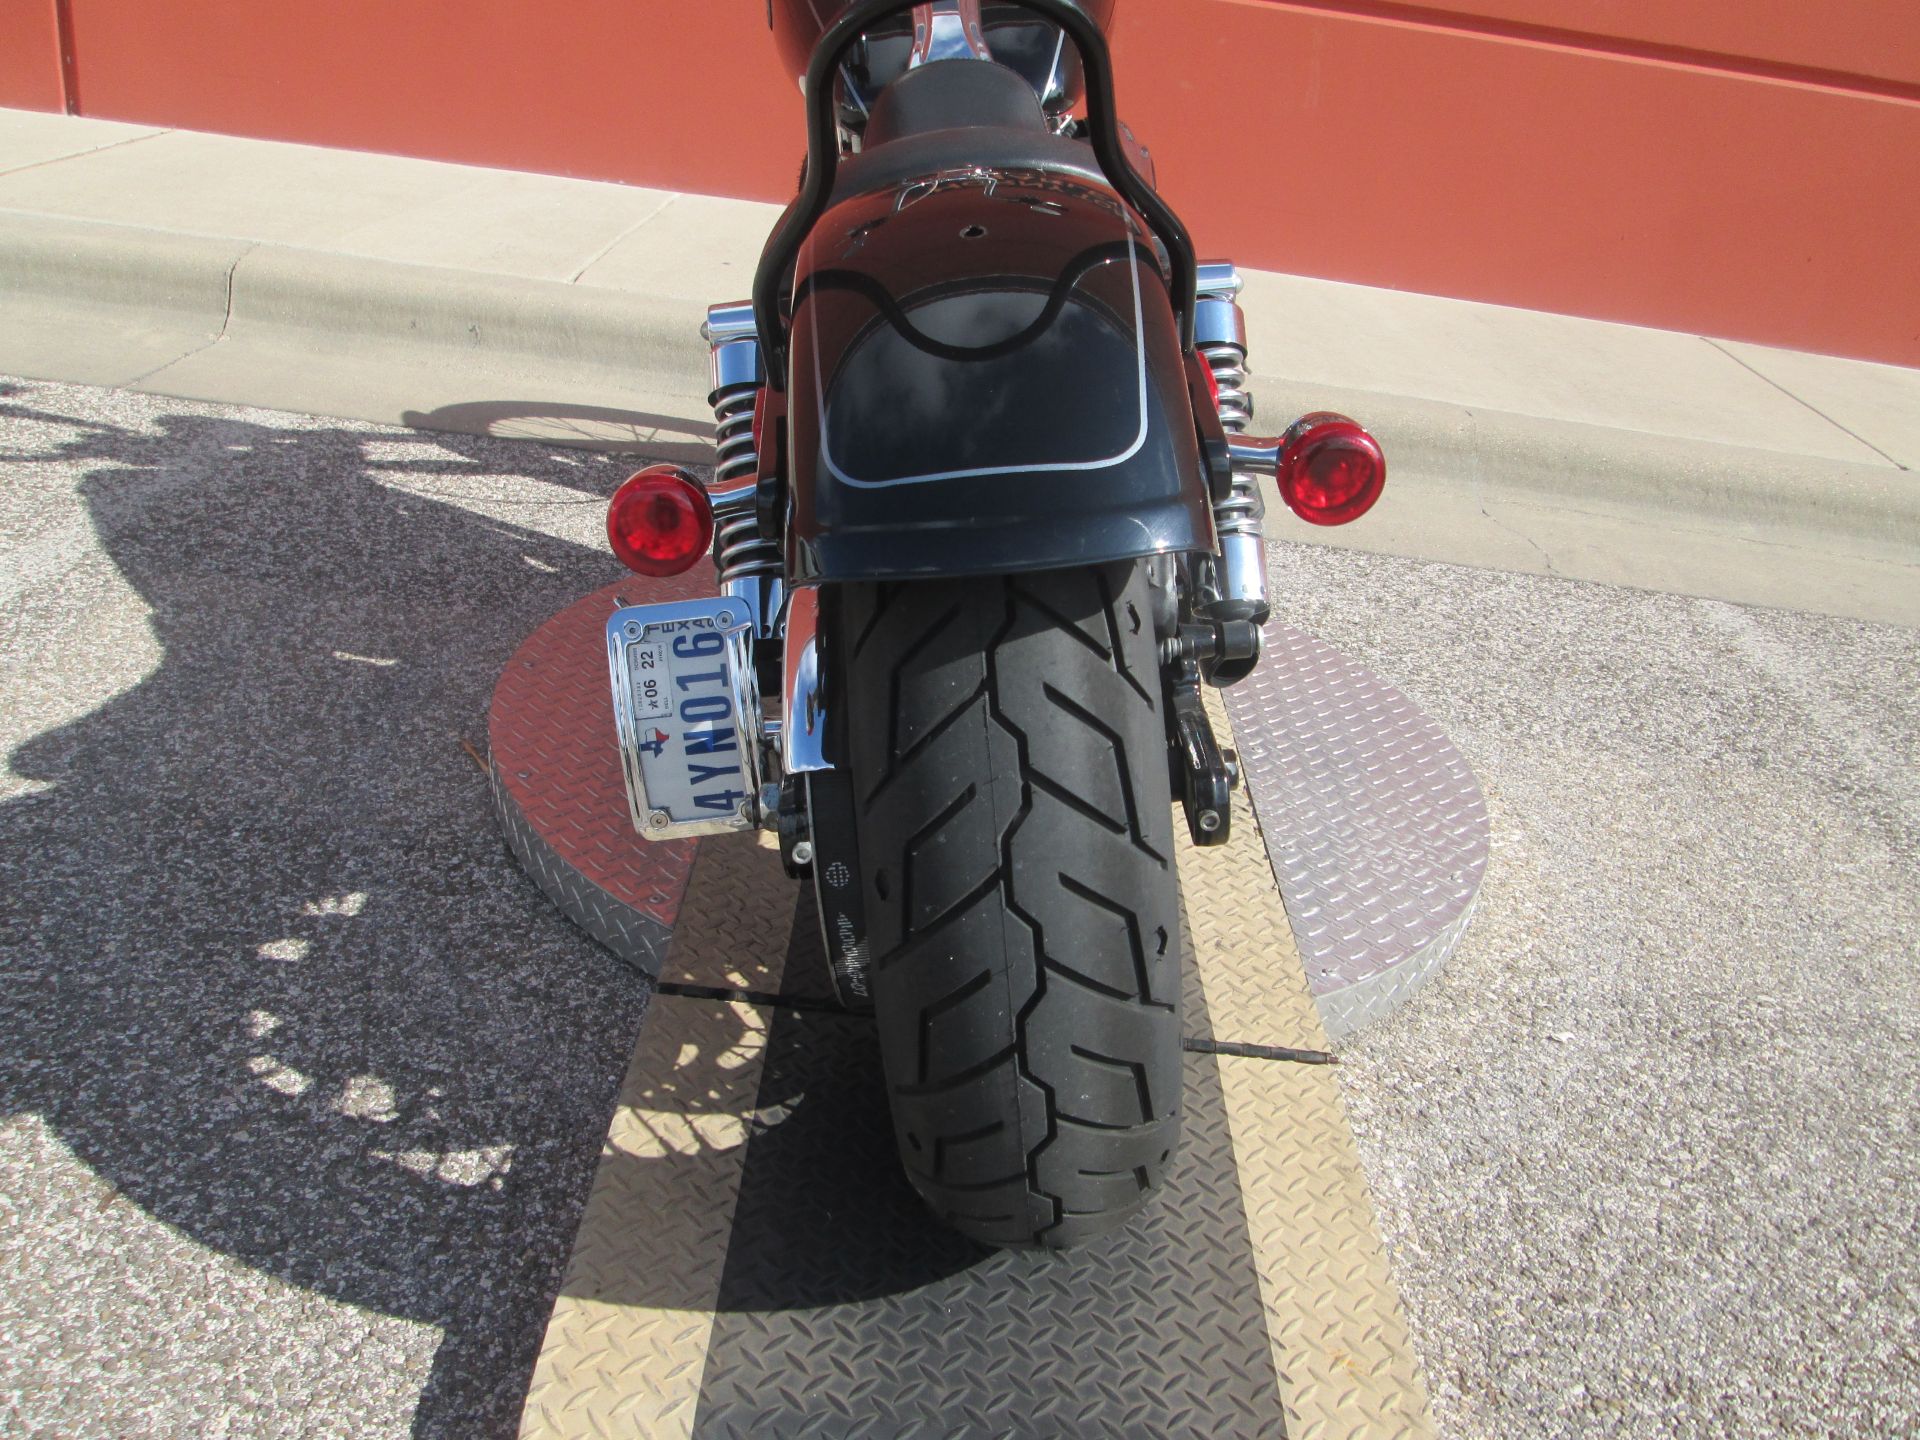 2013 Harley-Davidson Dyna® Wide Glide® in Temple, Texas - Photo 10